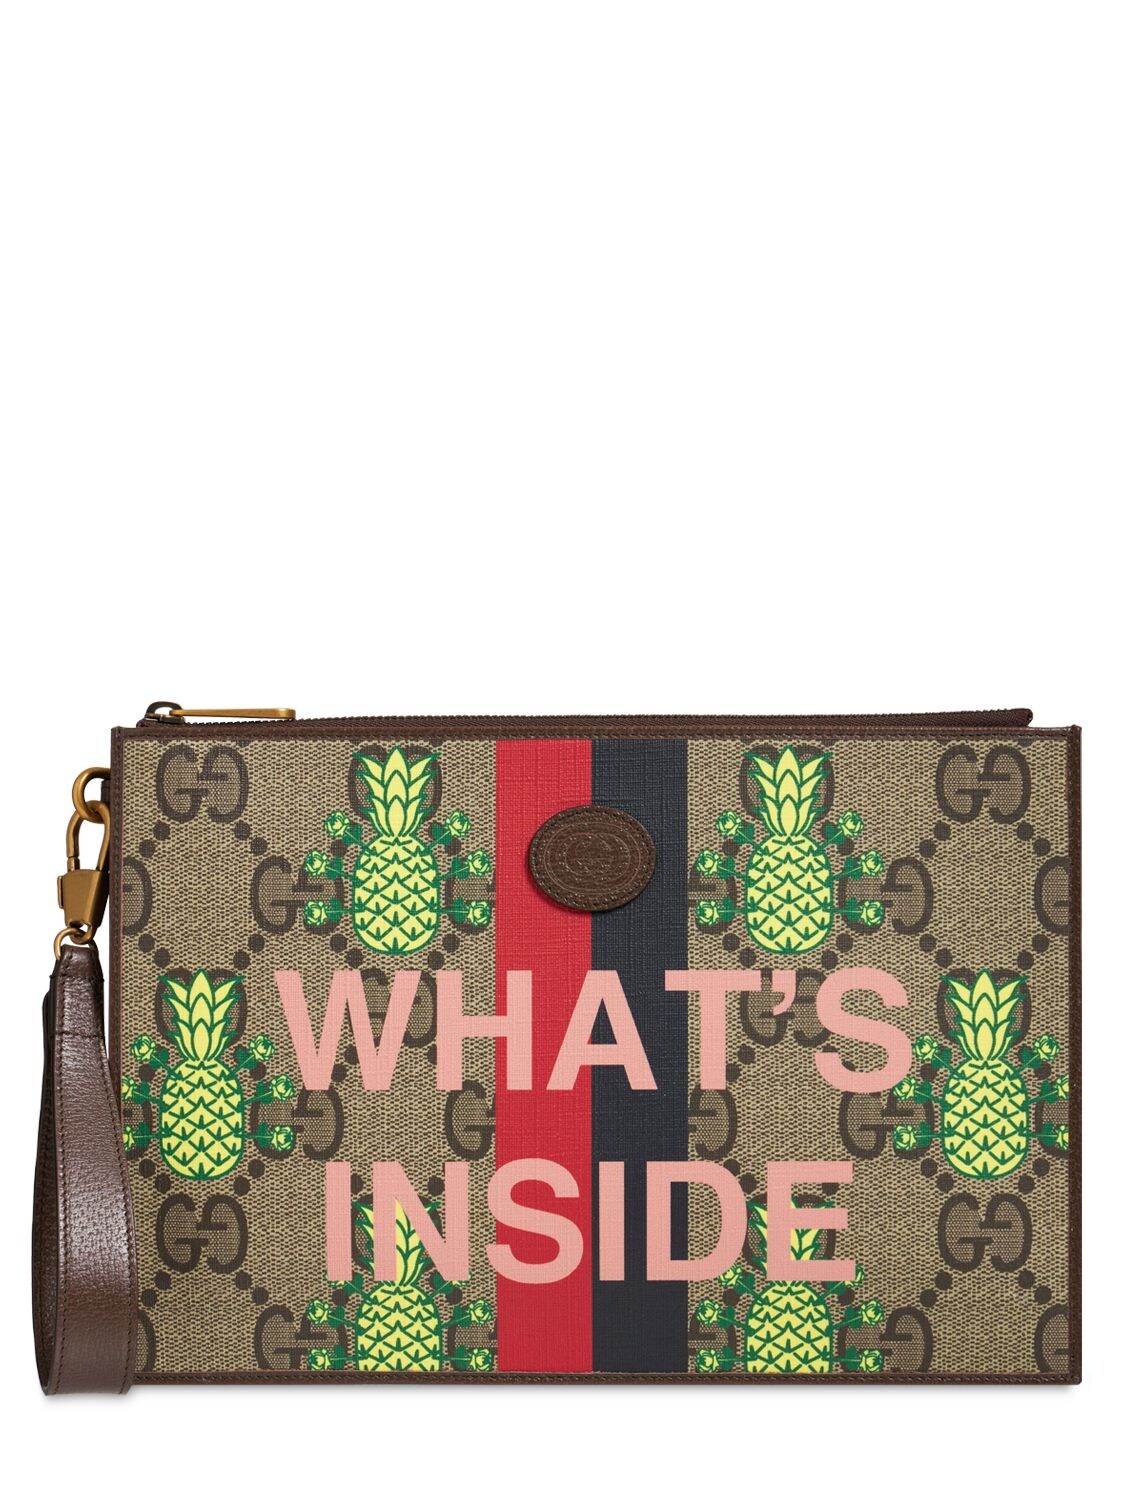 GUCCI PINEAPPLE LOGO COATED CANVAS POUCH